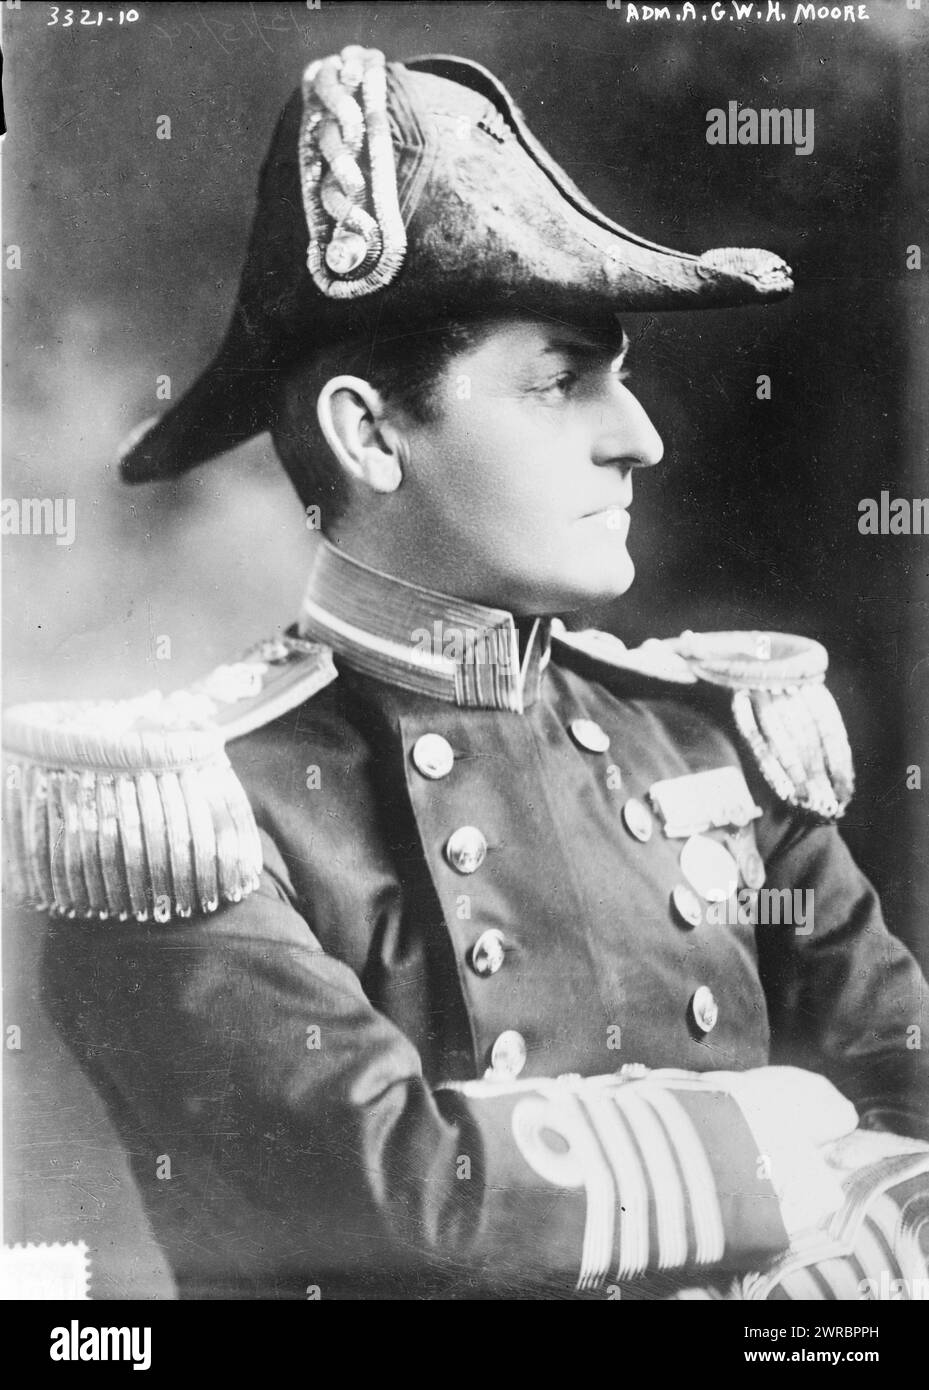 Adm. A.G.W.H. Moore, Photograph shows British Royal Navy admiral Gordon Moore., 1914 Dec. 12, Glass negatives, 1 negative: glass Stock Photo